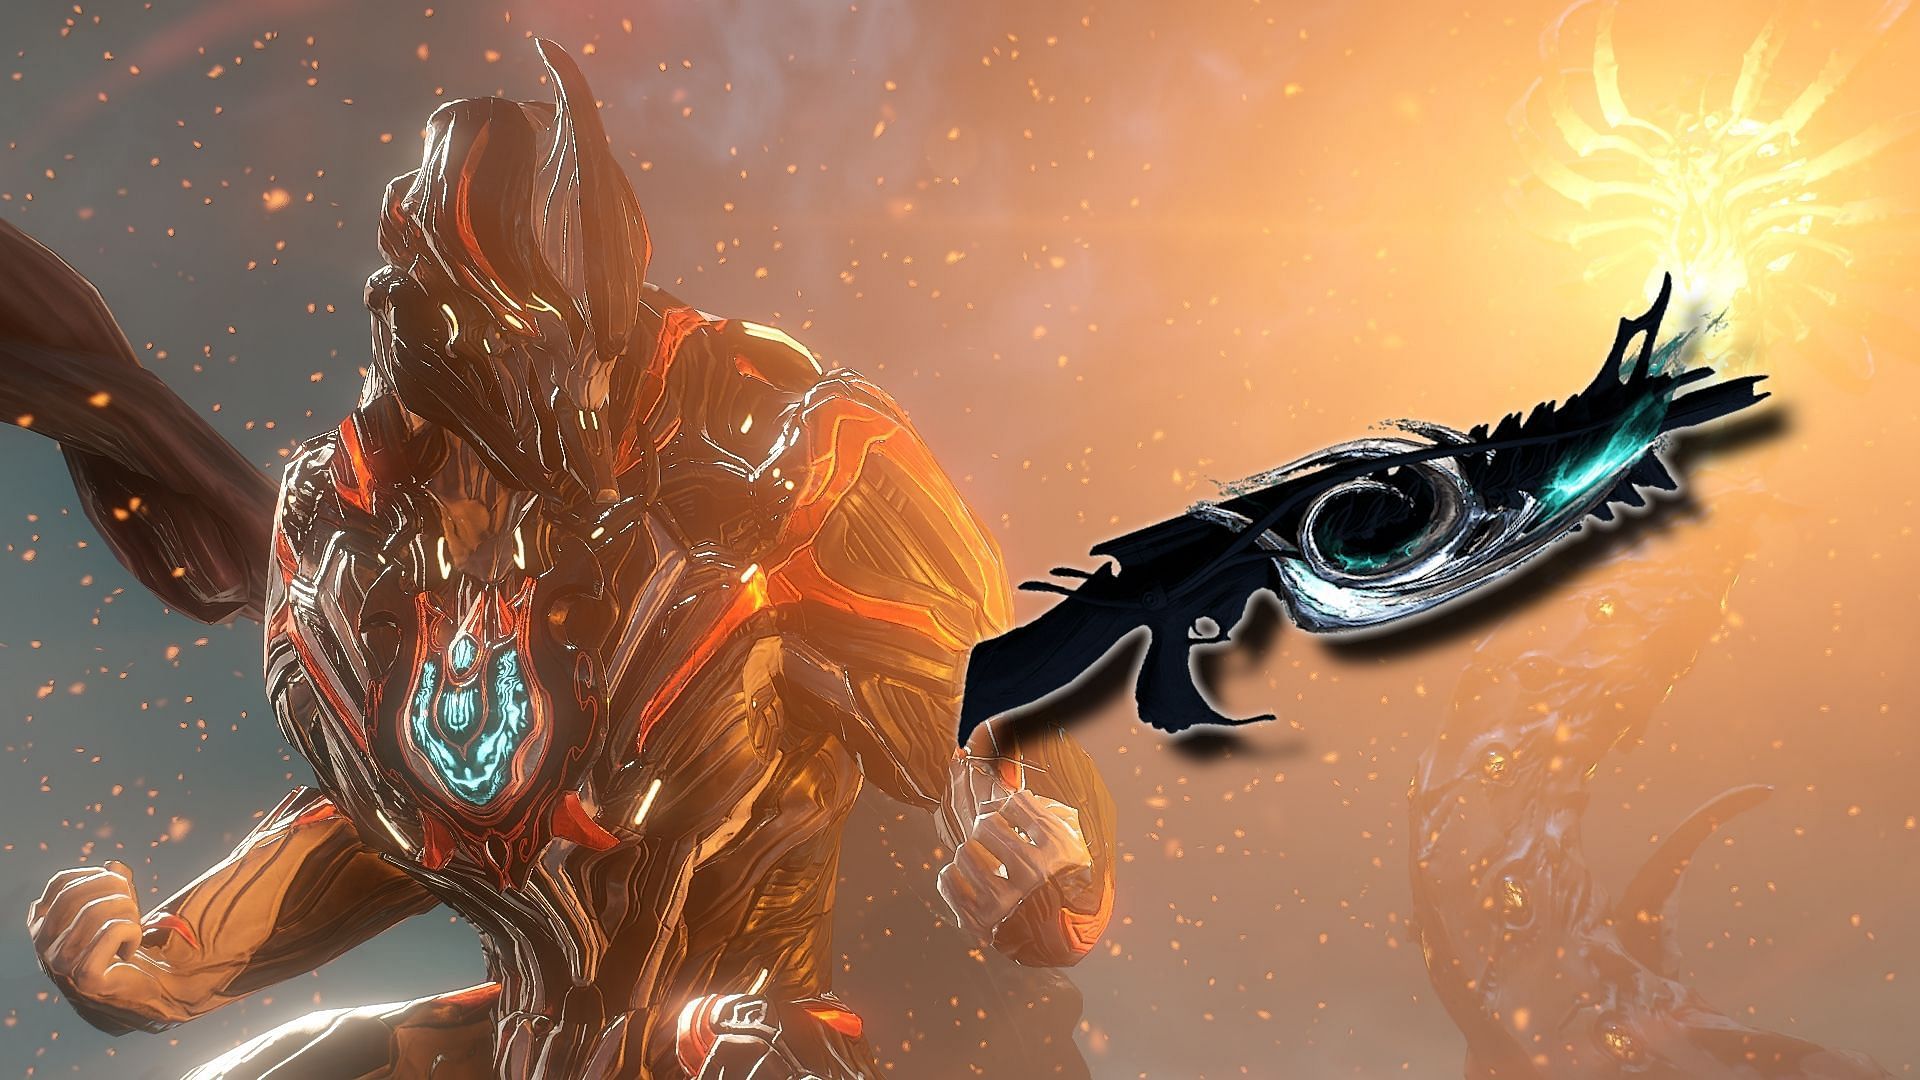 An image of the Rhino Warframe with Incarnon Boltor in the foreground